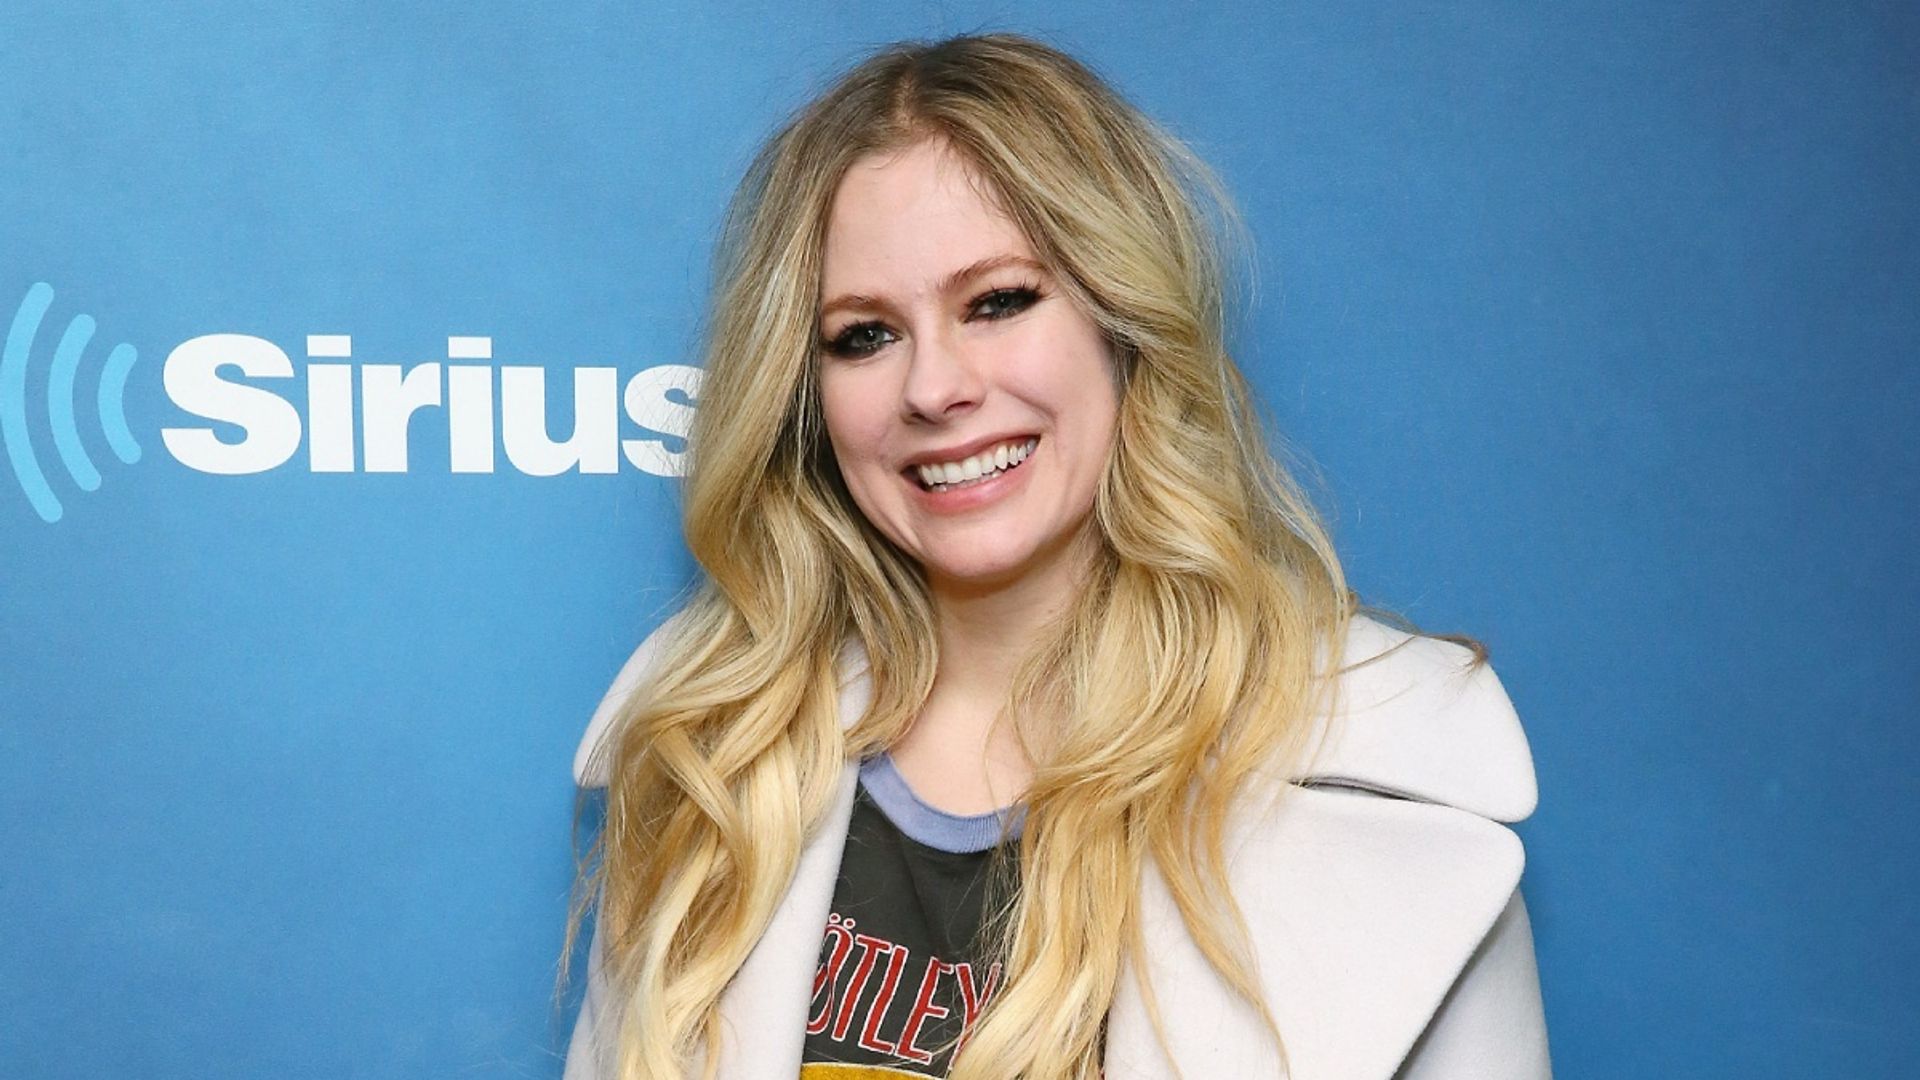 Avril Lavigne looks almost unrecognizable in latest appearance to